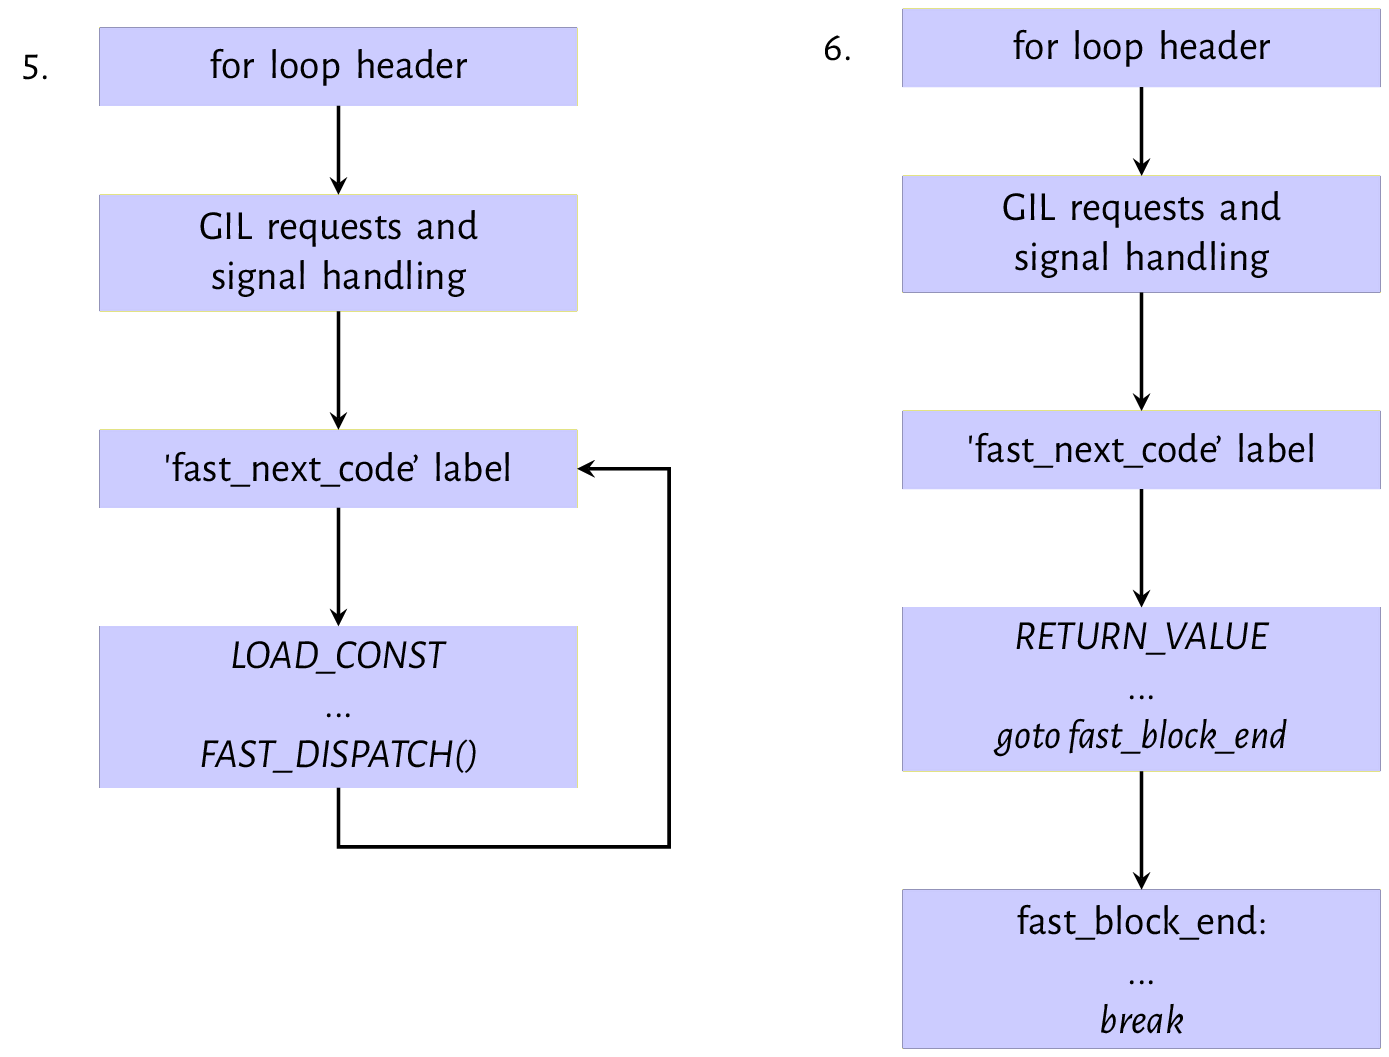 Figure 9.3: Evaluation path for `LOAD_CONST` and `RETURN_VALUE` instruction